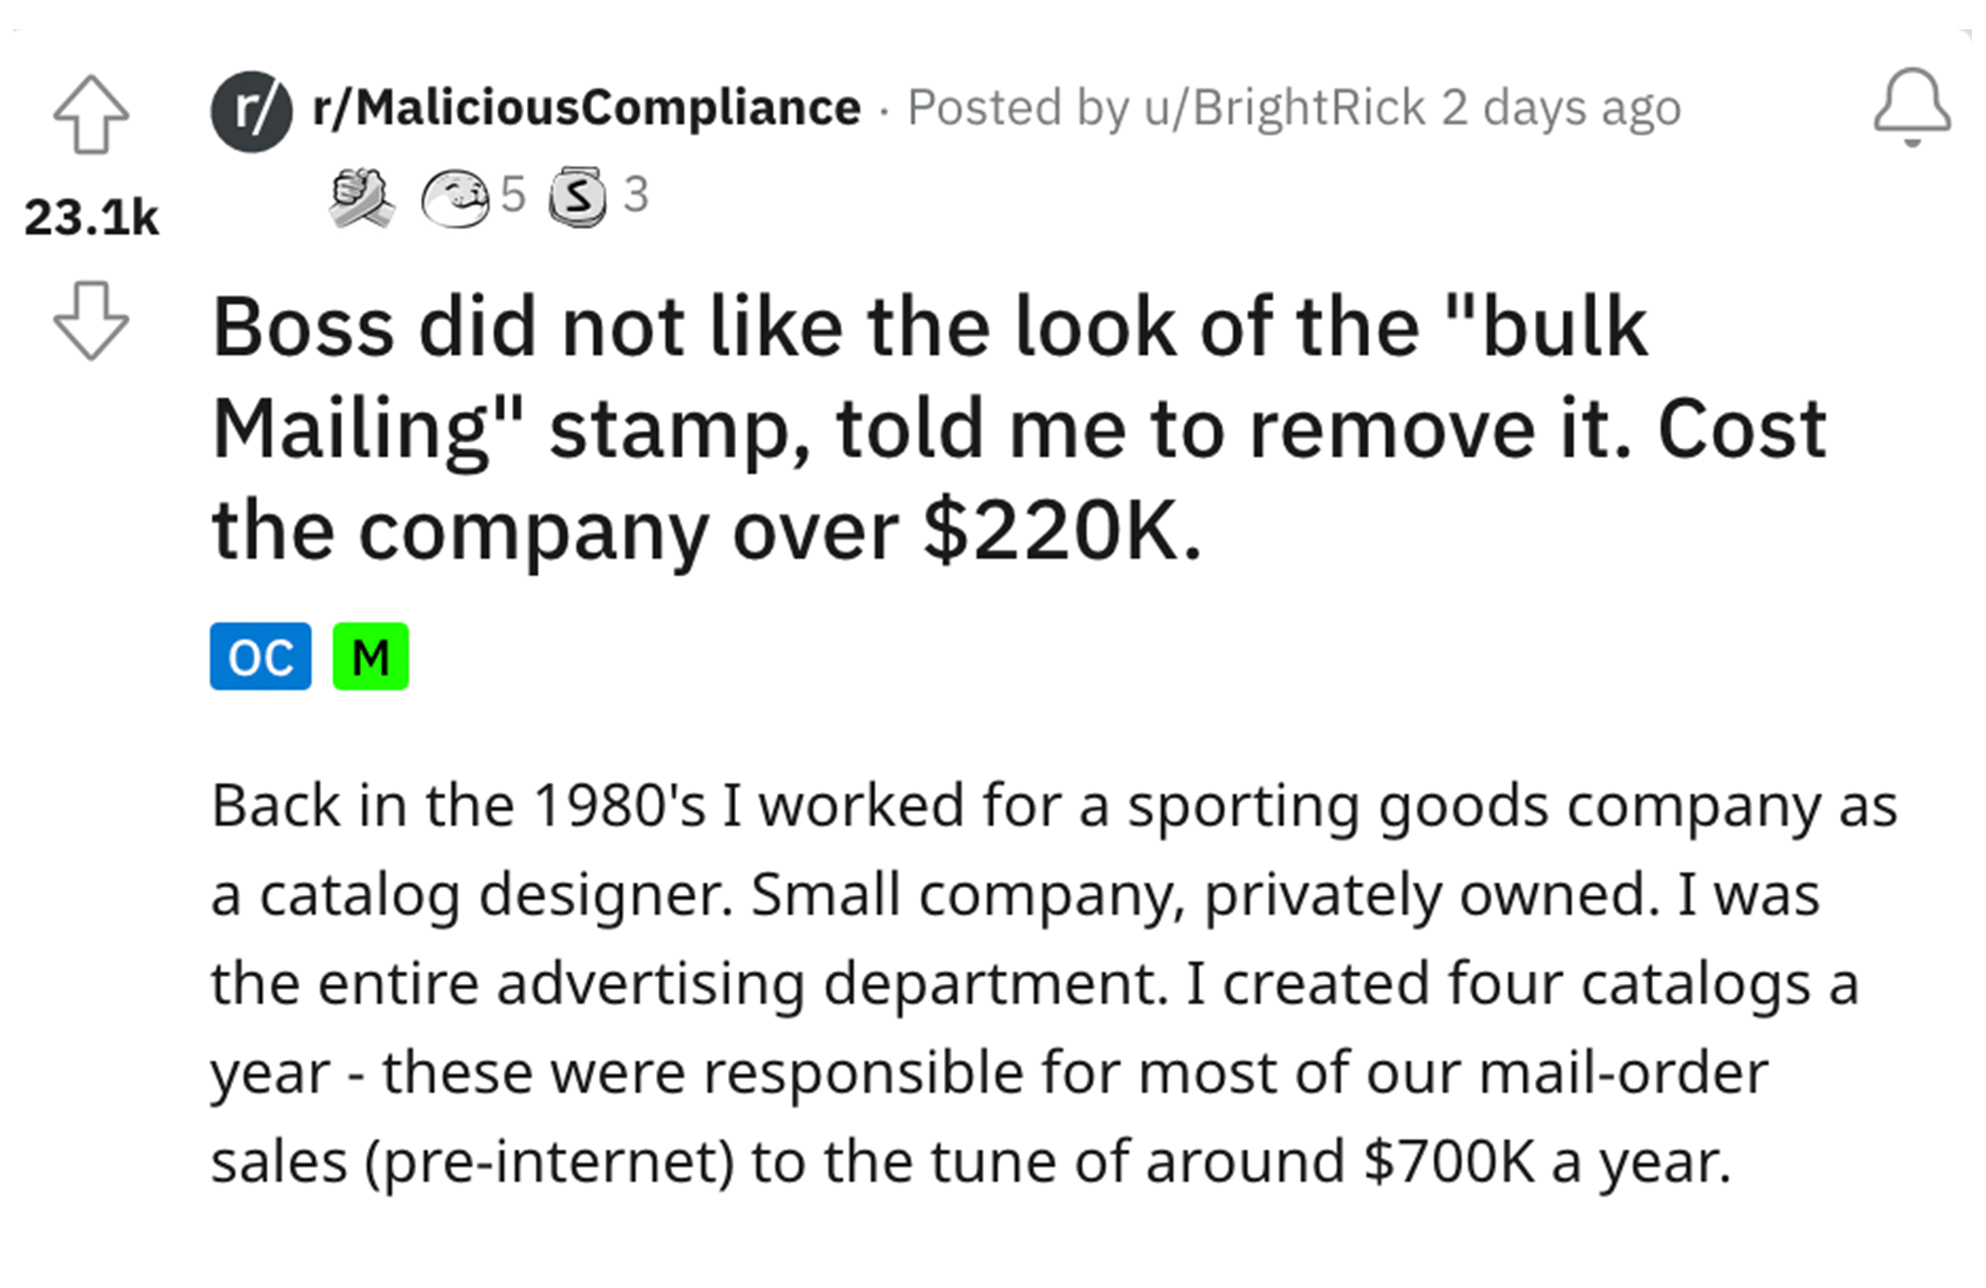 Entitled Boss gets fired - Hormone - rrMaliciousCompliance Posted by uBrightRick 2 days ago 5 33 Boss did not the look of the "bulk Mailing" stamp, told me to remove it. Cost the company over $. Oc M Back in the 1980's I worked for a sporting goods compan